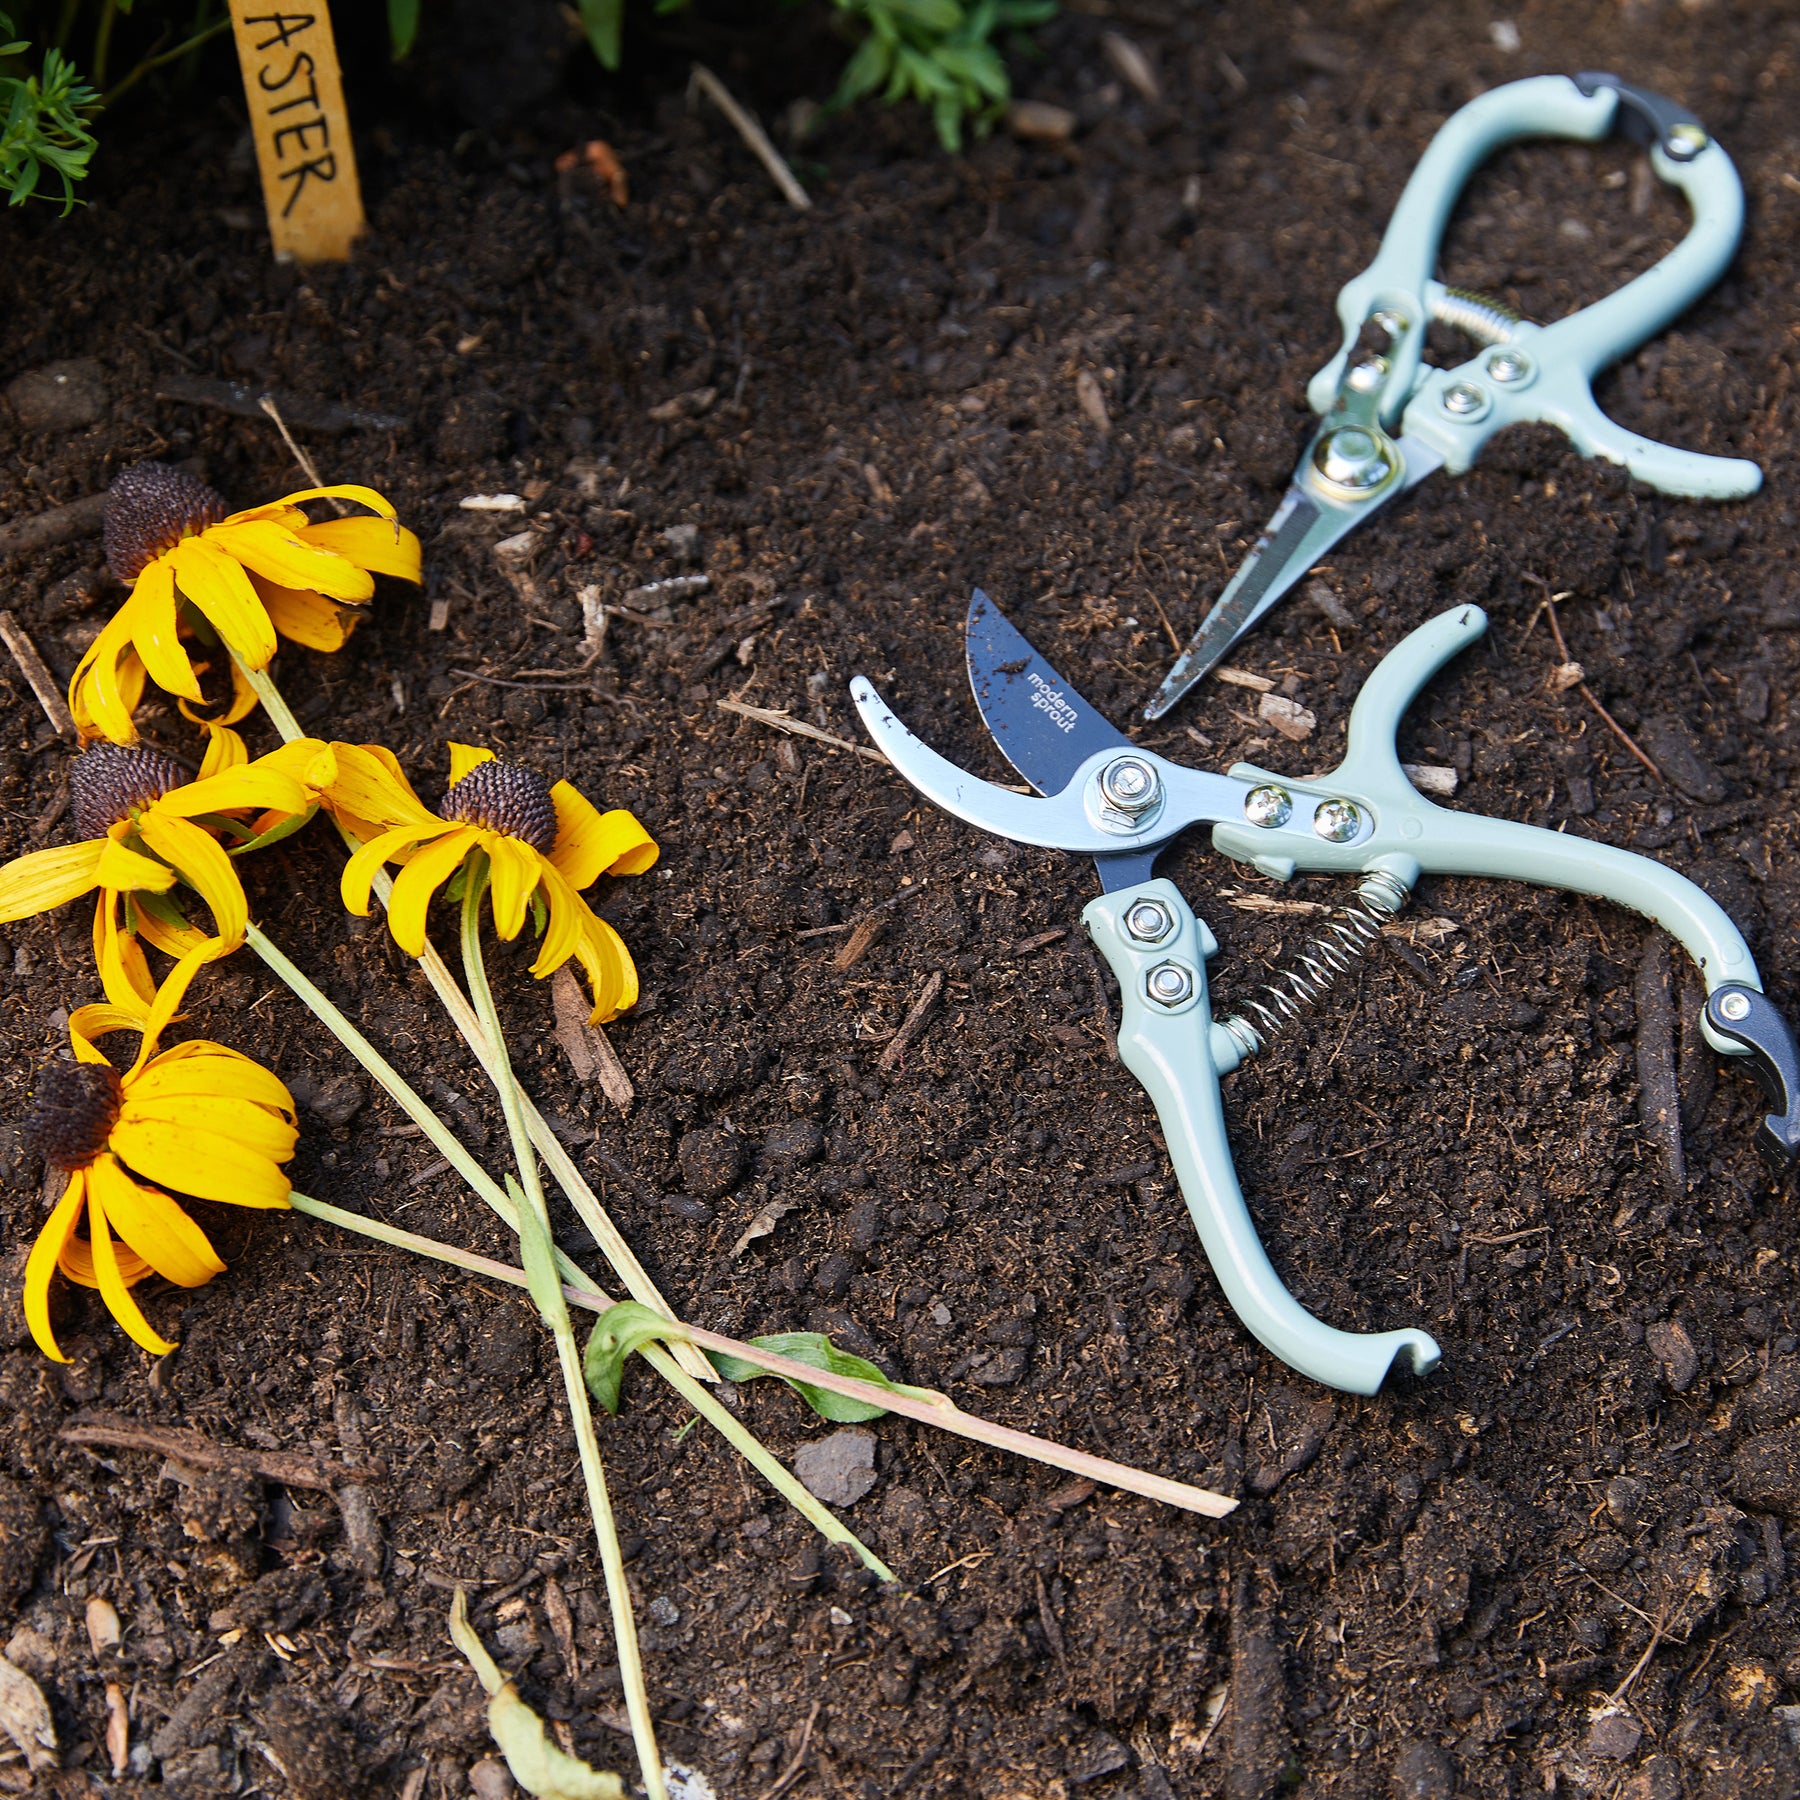 Best Hand Pruners / Pruning Shears: Guide & Recommendations - Gardening  Products Review